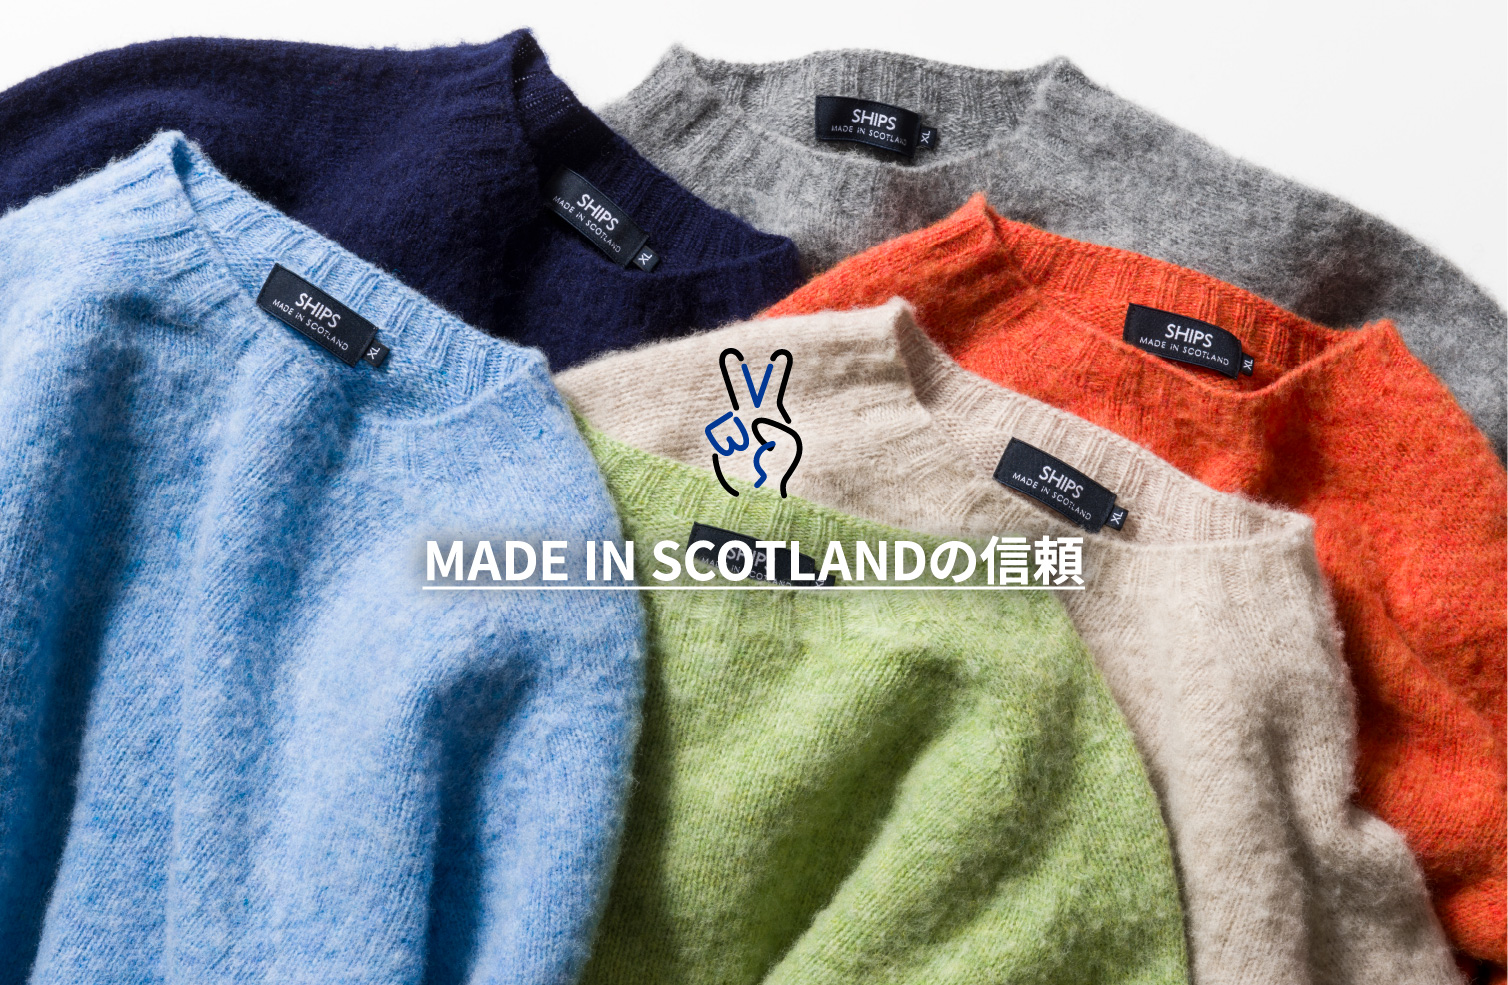 MADE IN SCOTLANDの信頼